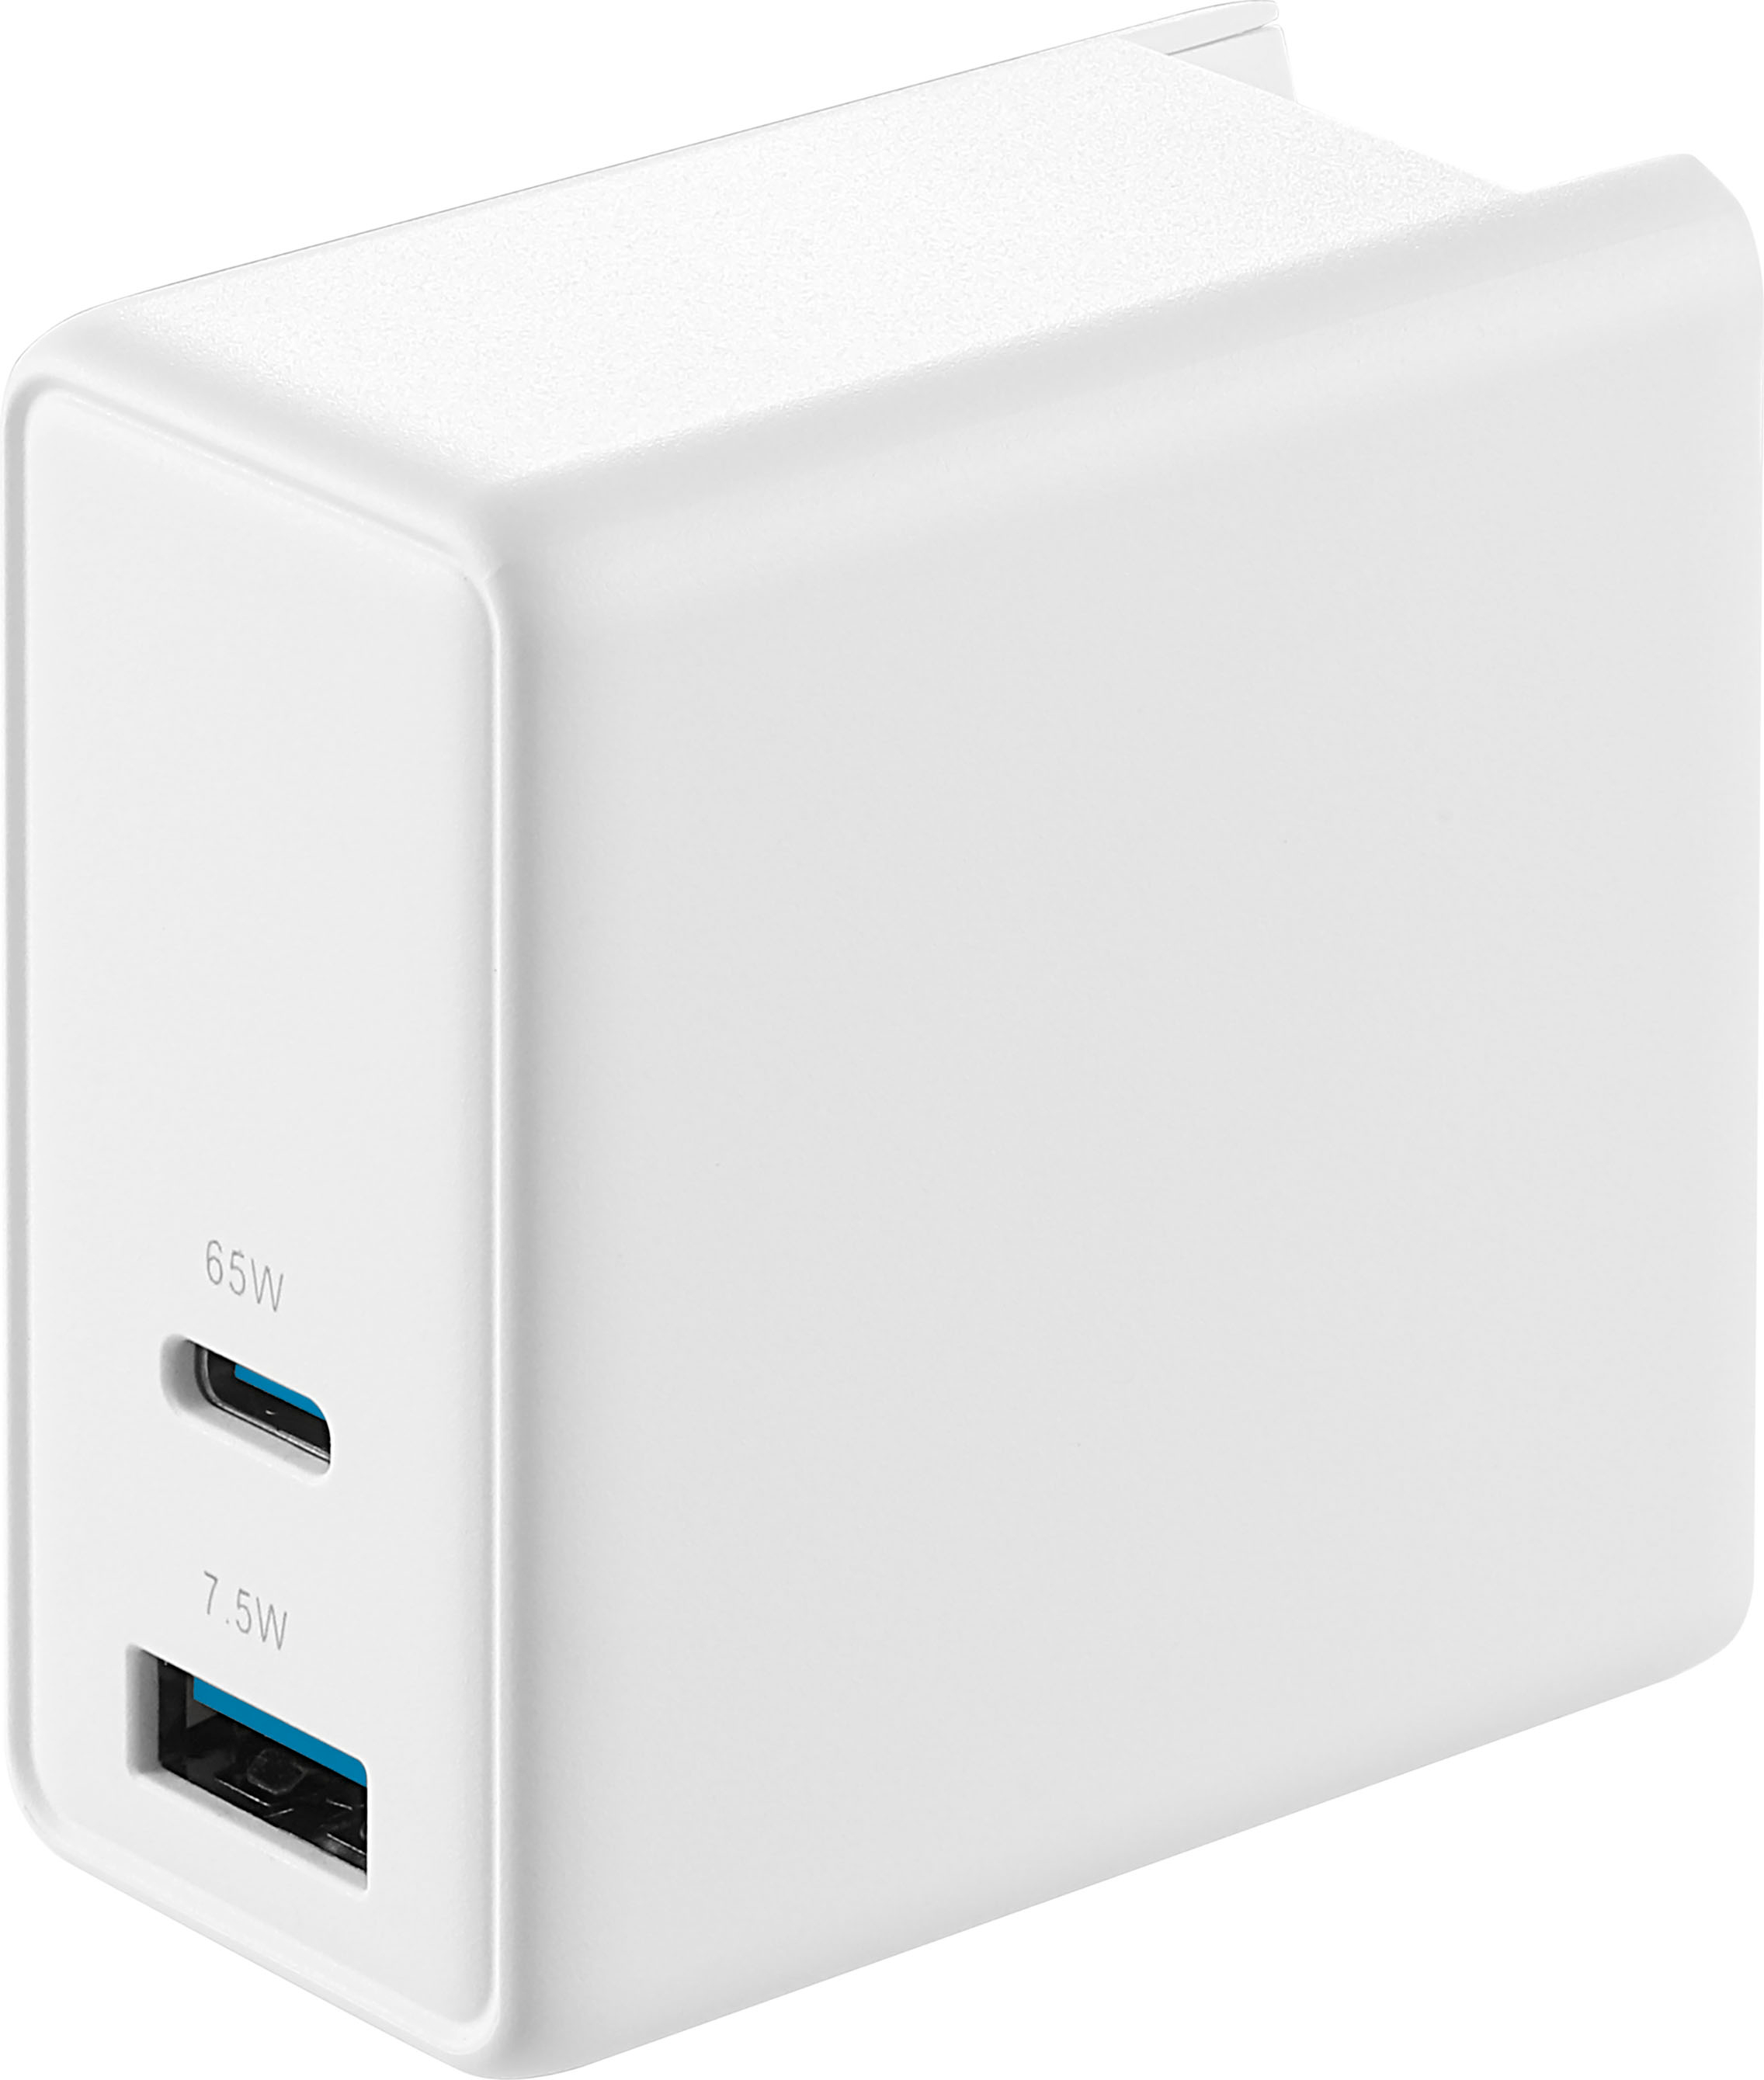 The Best Multiport USB Wall Charger - IGN